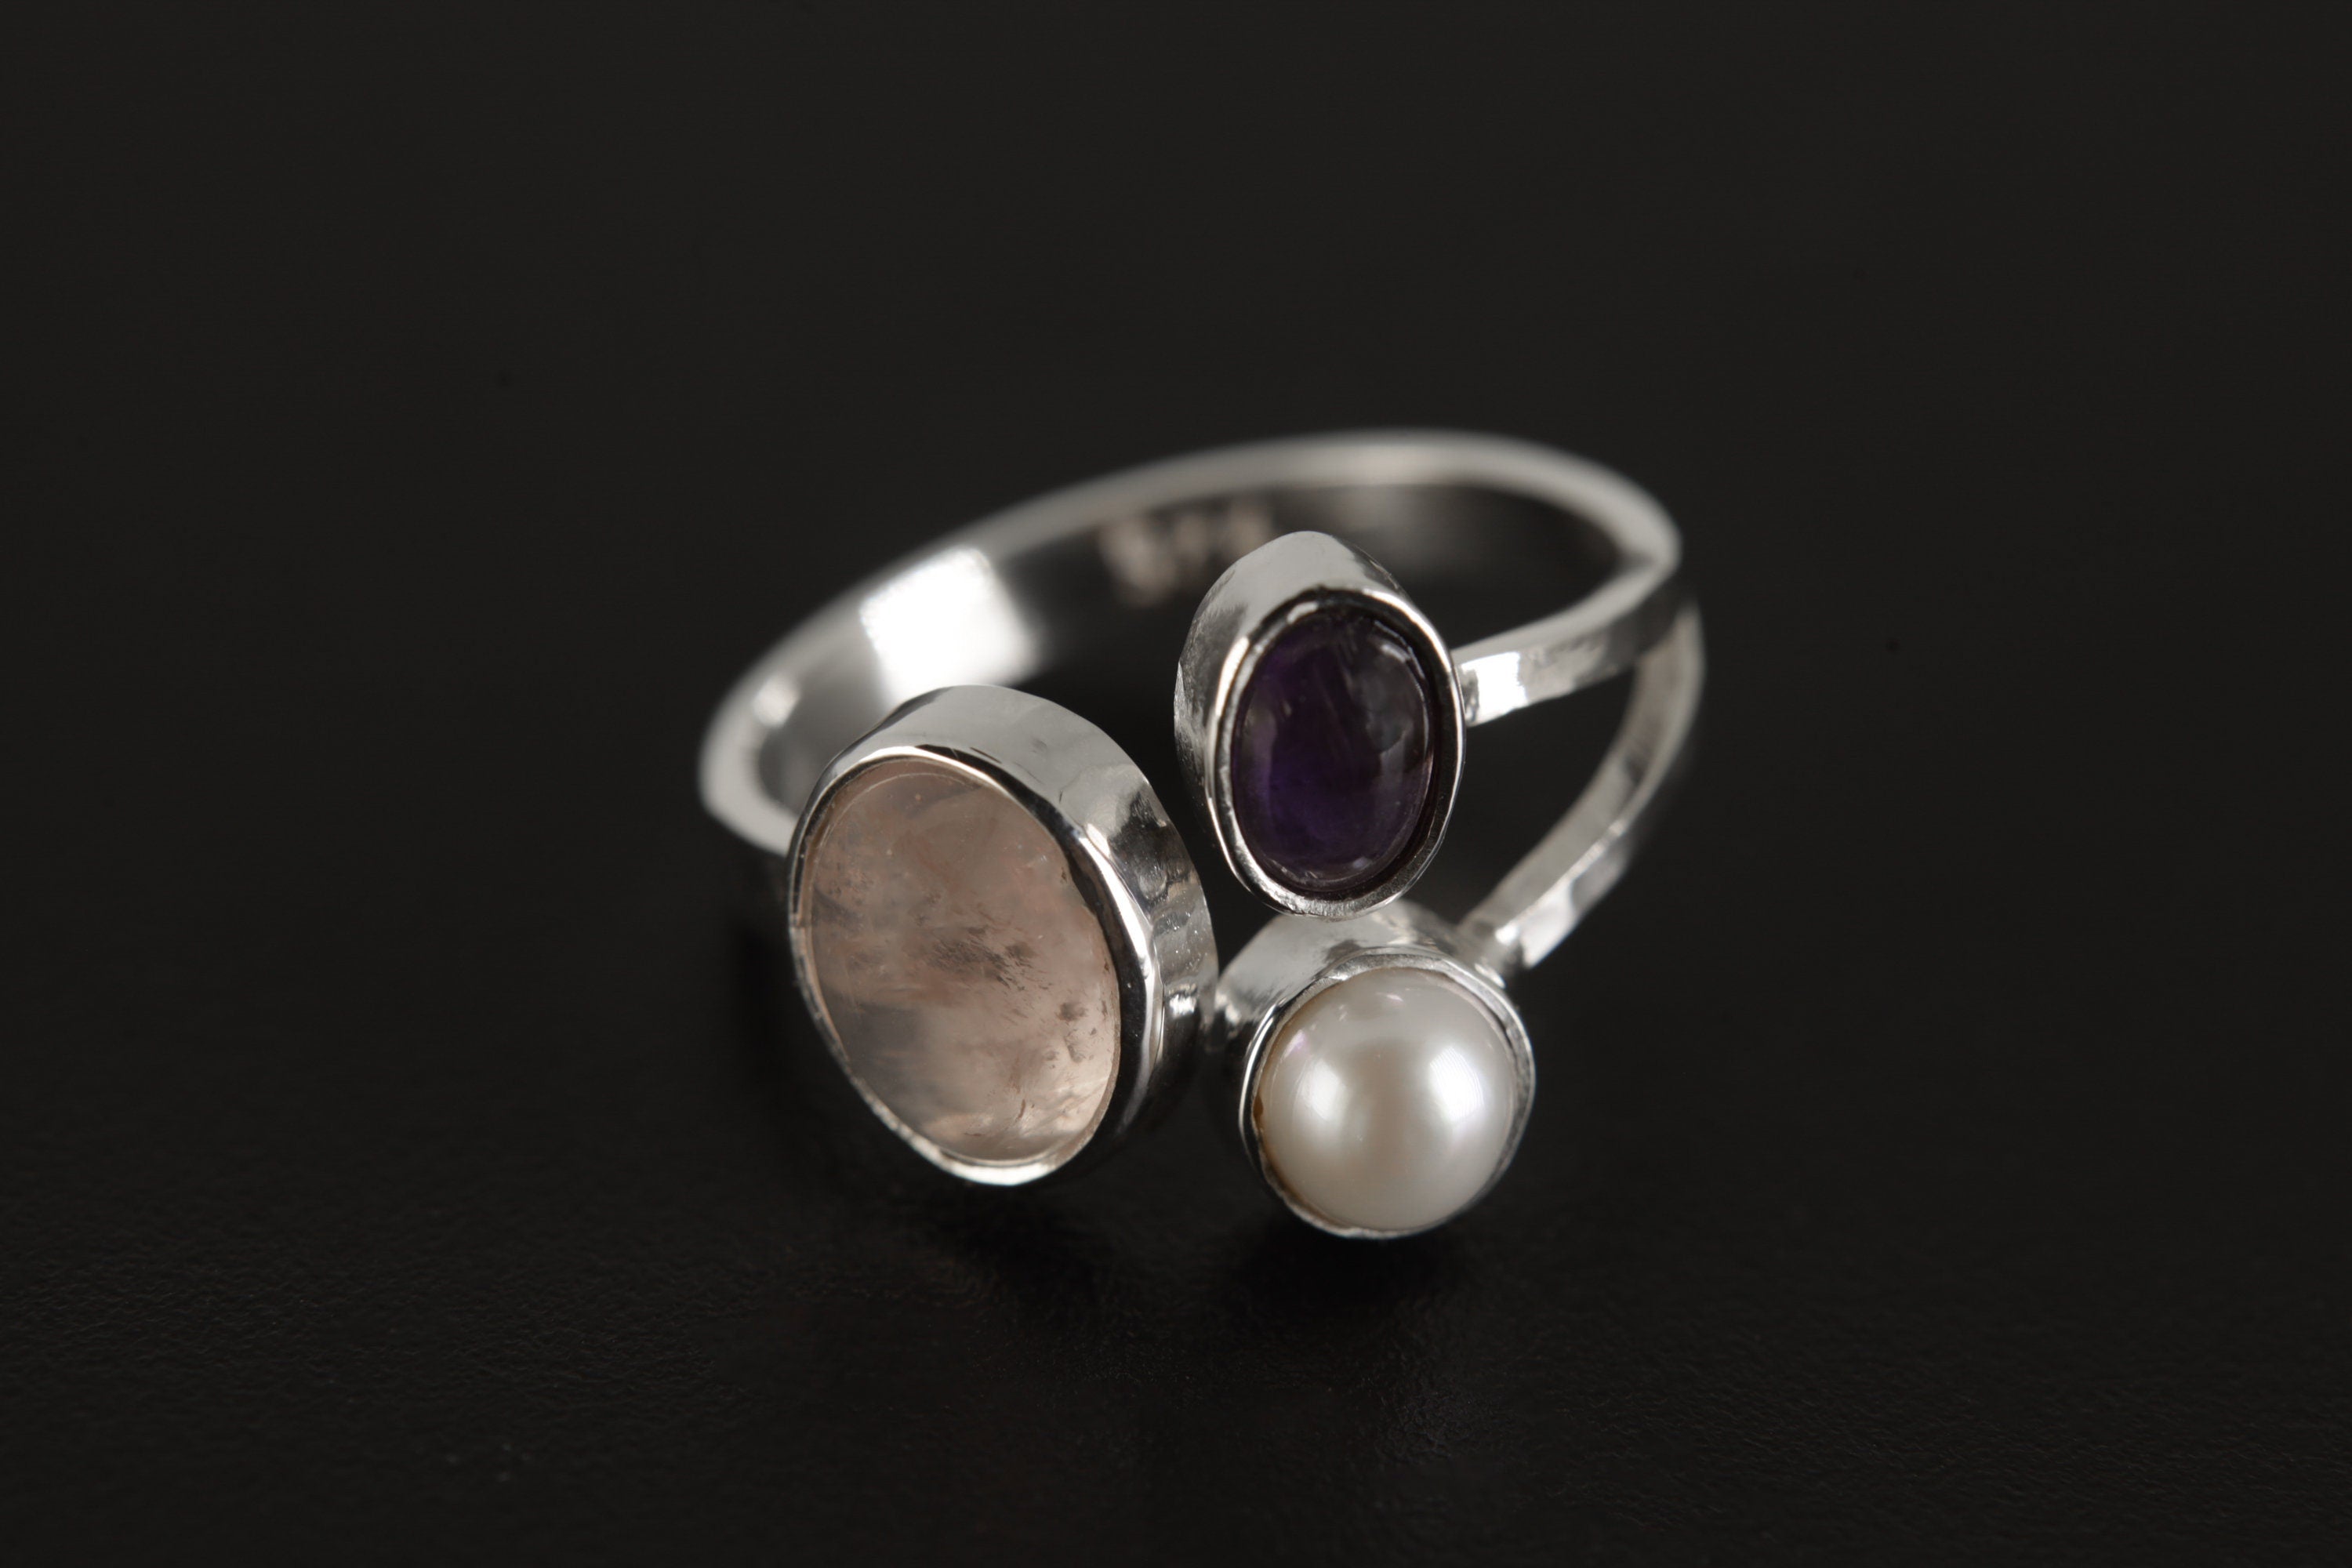 Adjustable Ring set in Amethyst, Pearl & Rose Quartz - Sterling Silver - Hammer Textured Shiny Finish - Size 5-12 US